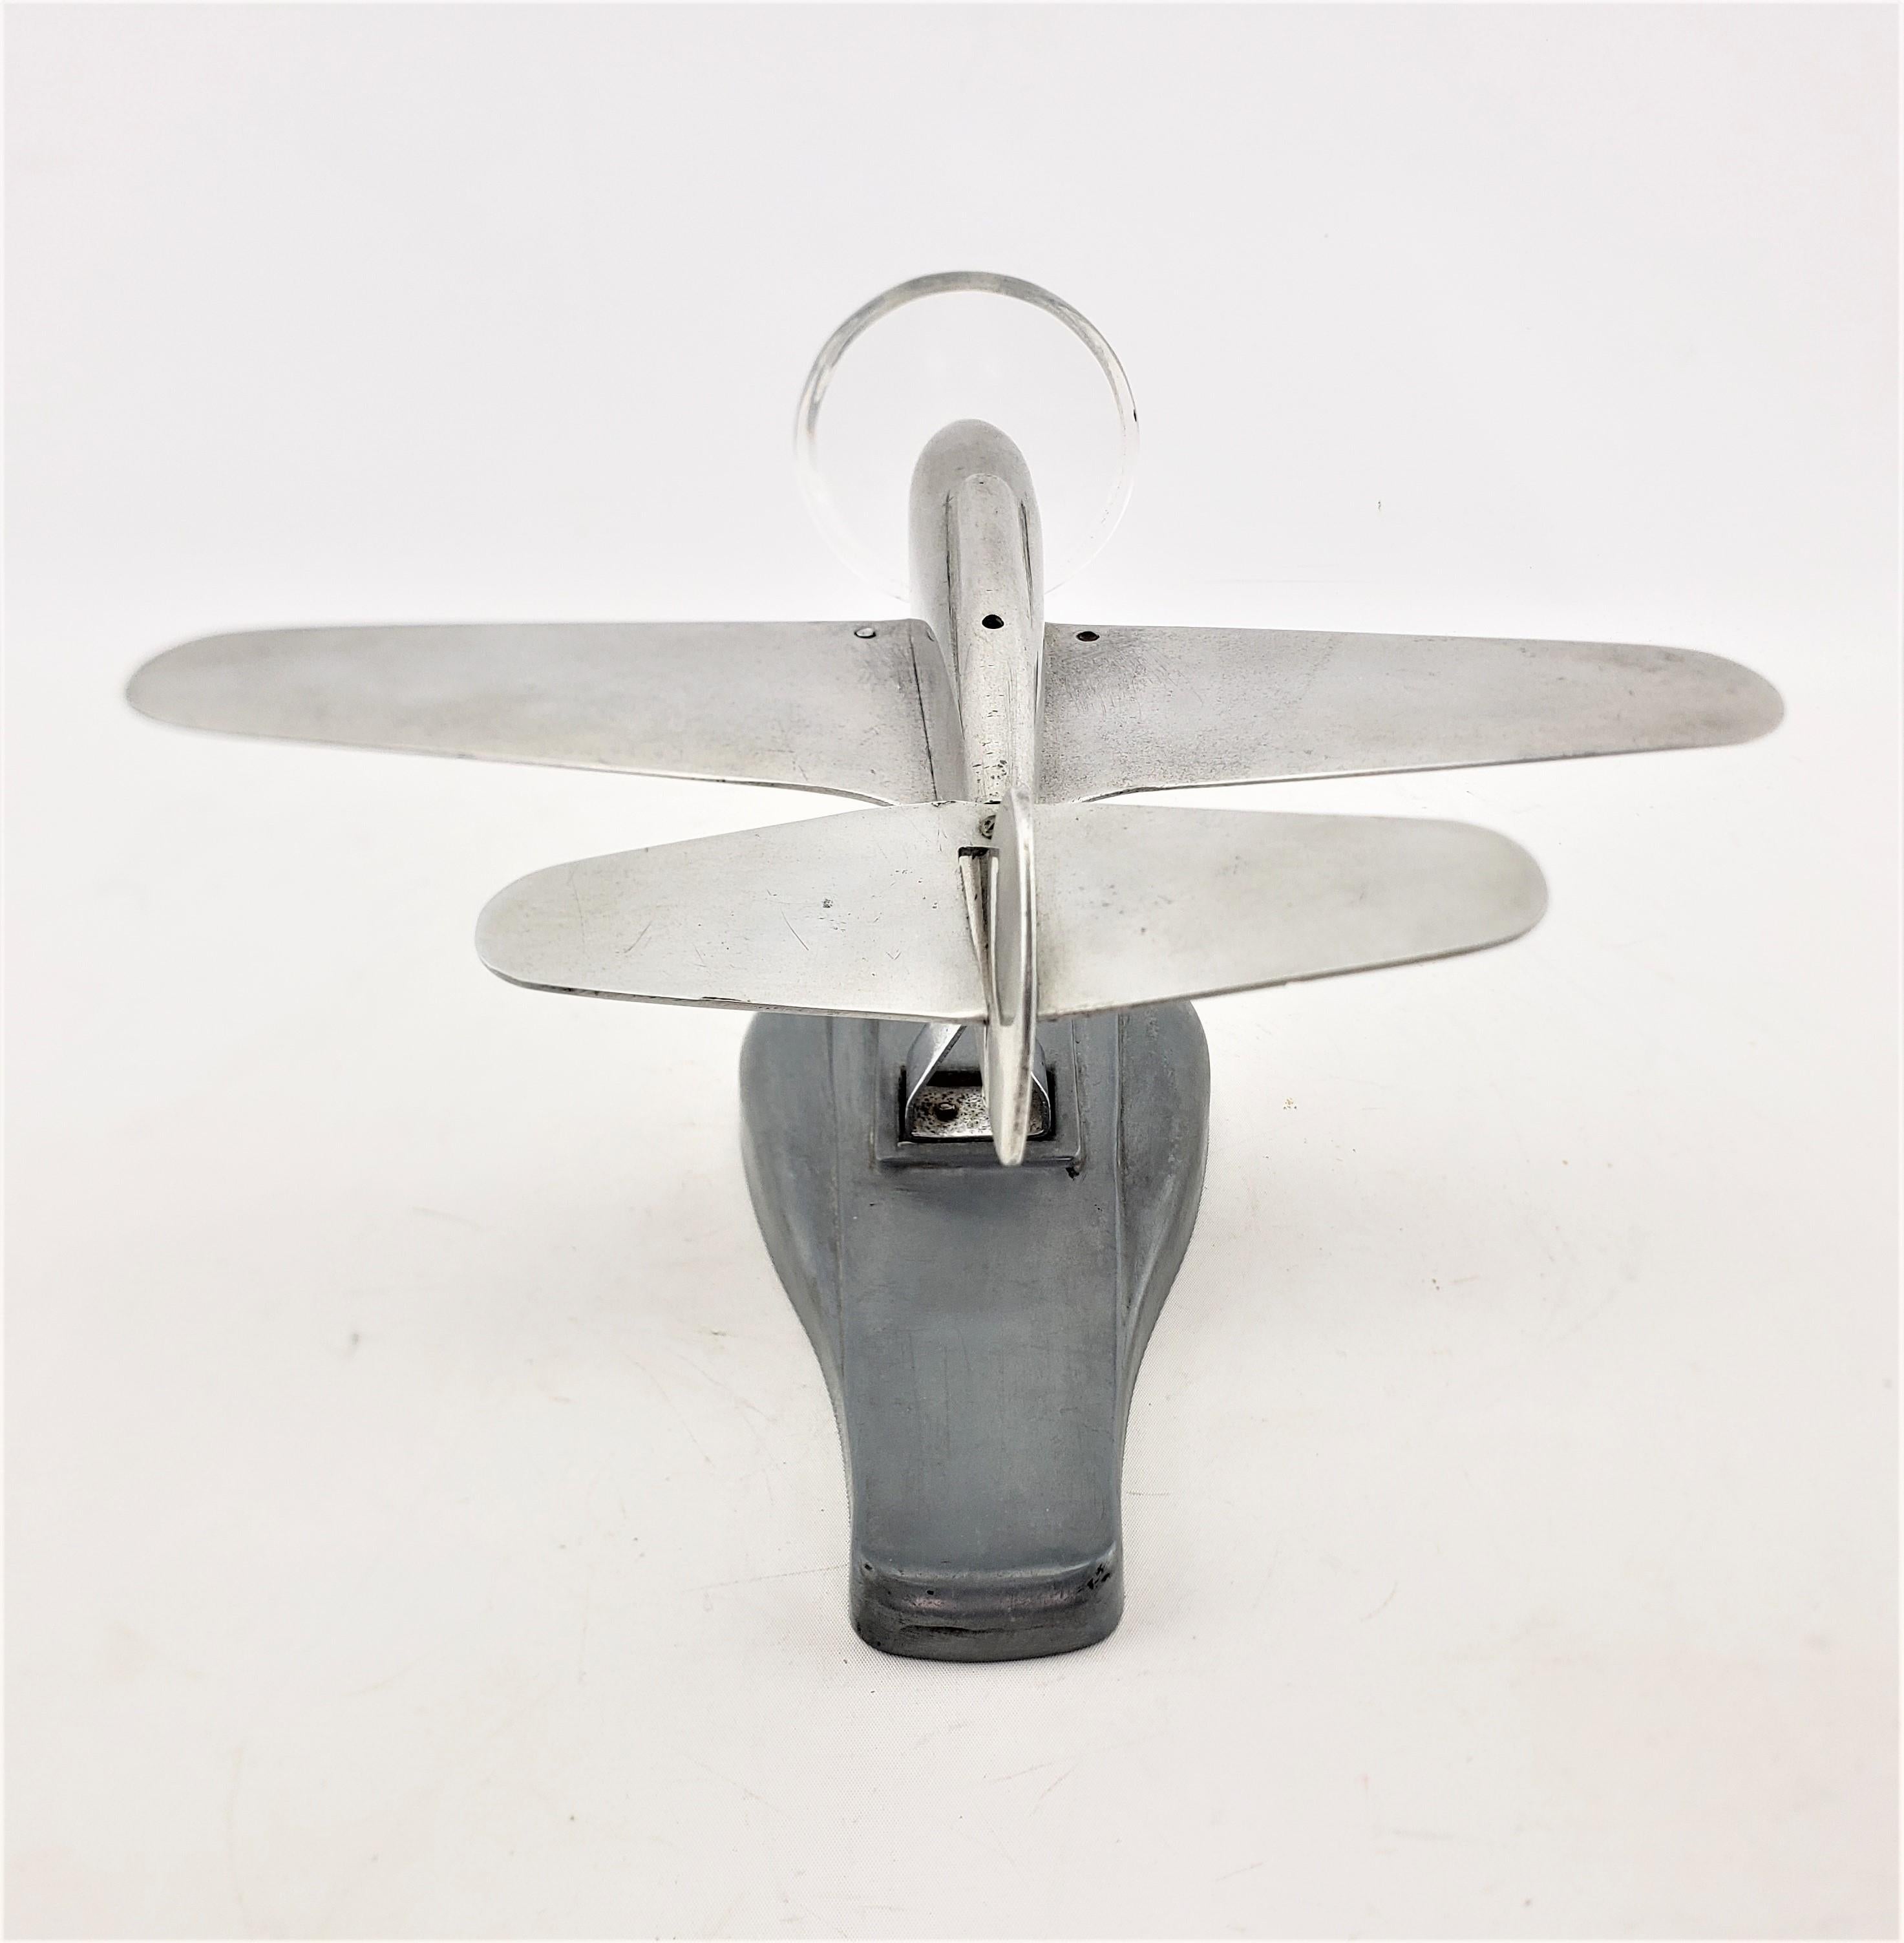 American Mid-Century Modern Cast Aluminum Stylized Airplane Model or Sculpture & Stand For Sale